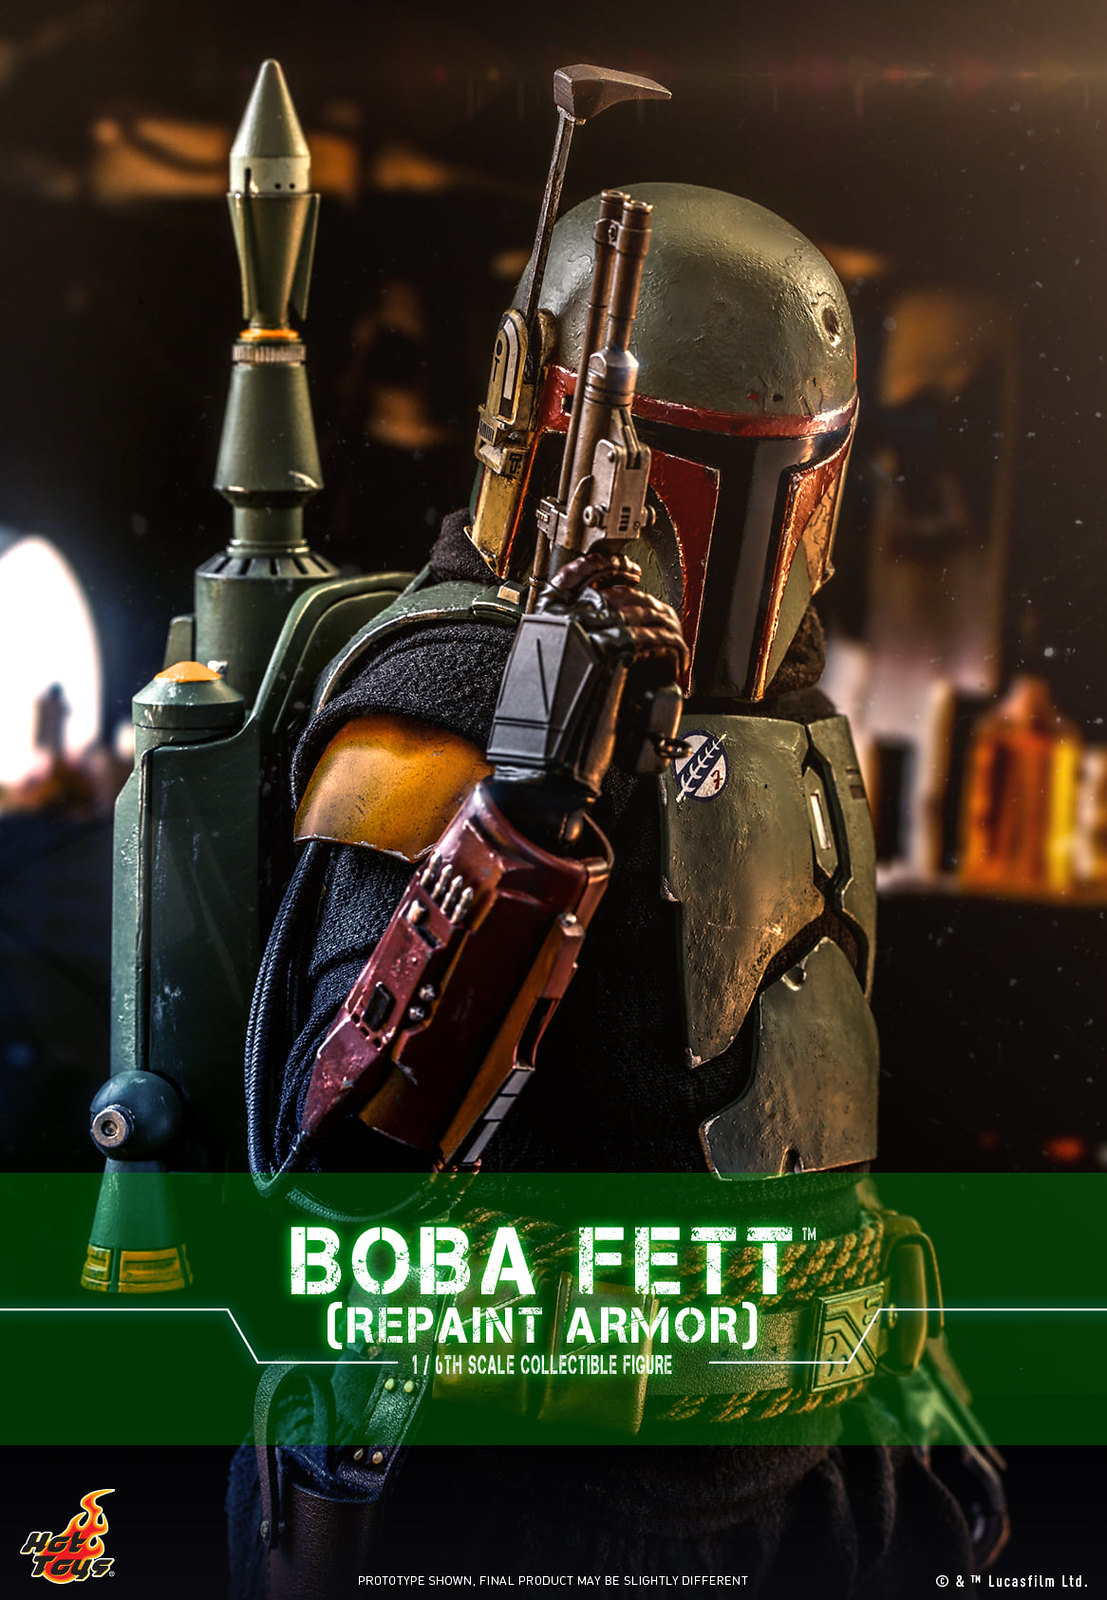 Star Wars: The Mandalorian™ - 1/6th scale Boba Fett™ (Repaint Armor) Collectible figure/ figure and Throne Collectible Set 51311290176_ff5d2ddf0b_h